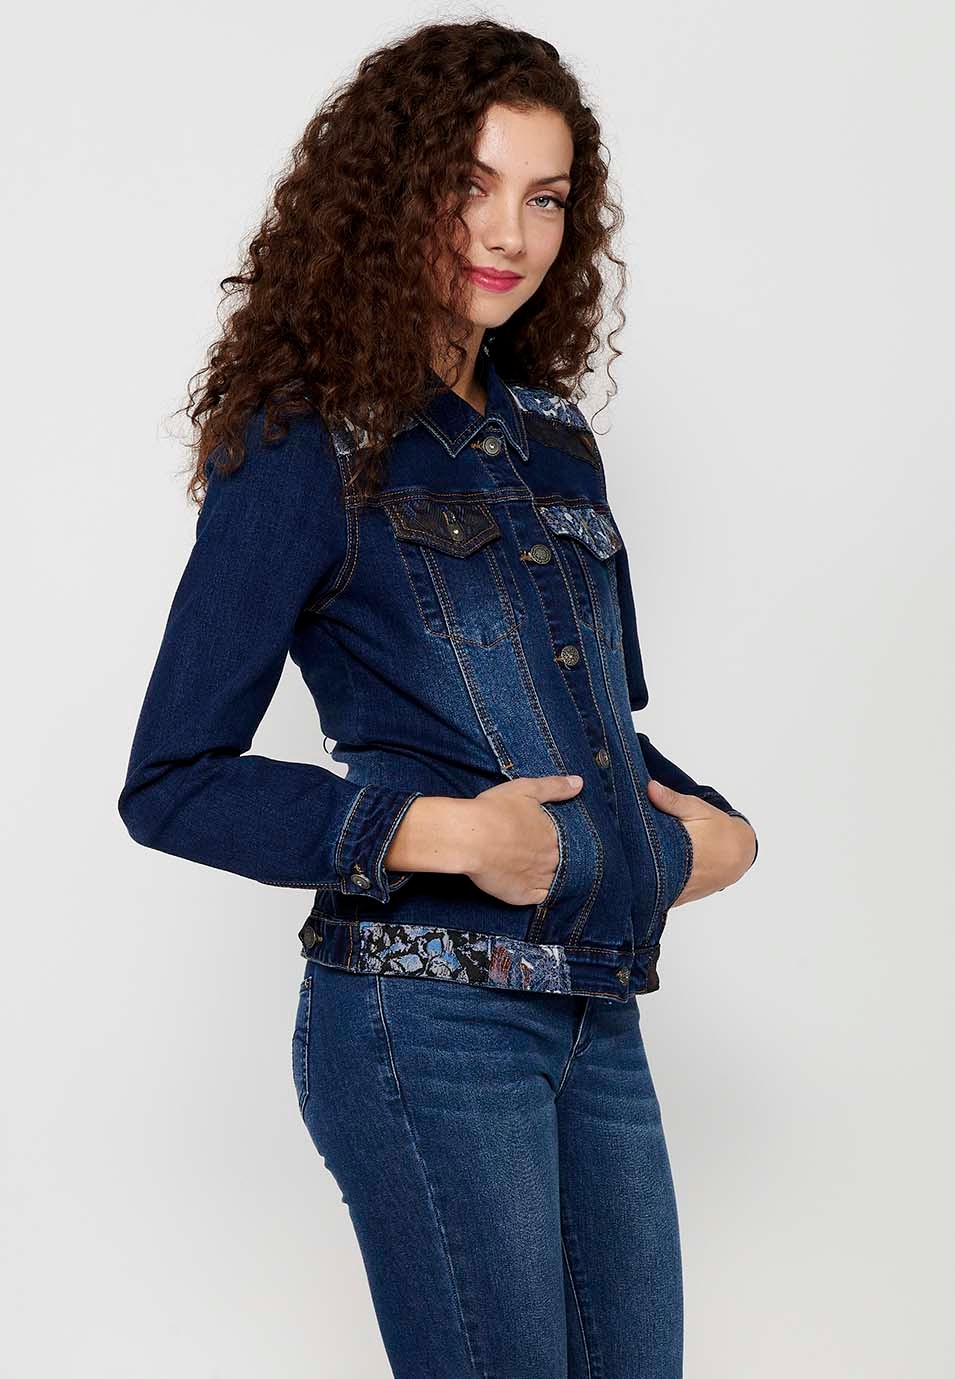 Dark Blue Long Sleeve Denim Jacket with Button Front Closure and Pockets with Embroidery on the Shoulders for Women 3